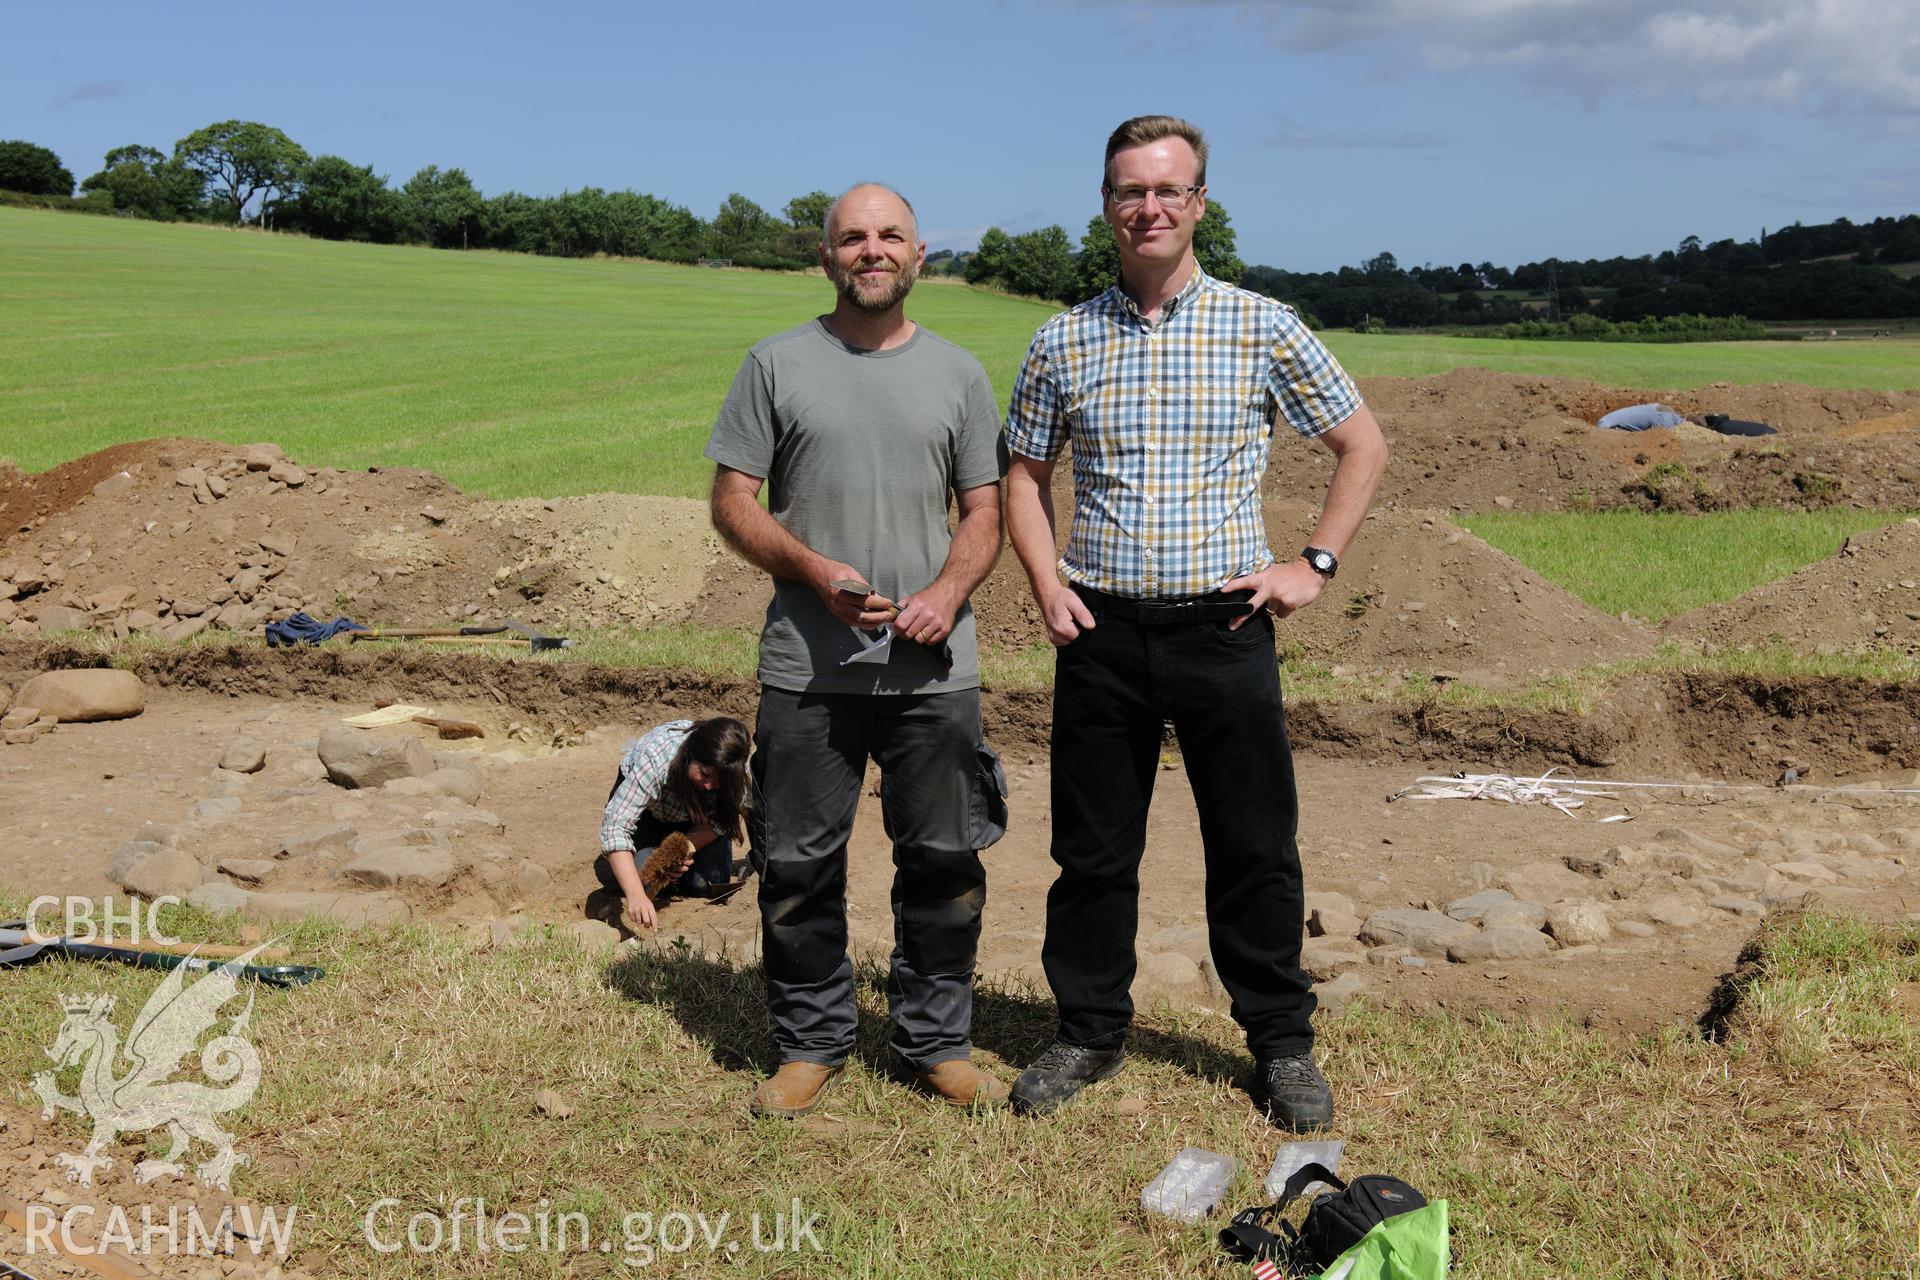 Excavations in progress at Llwydfaen under the direction of Dr Iestyn Jones, for S4C programme 'Olion'.